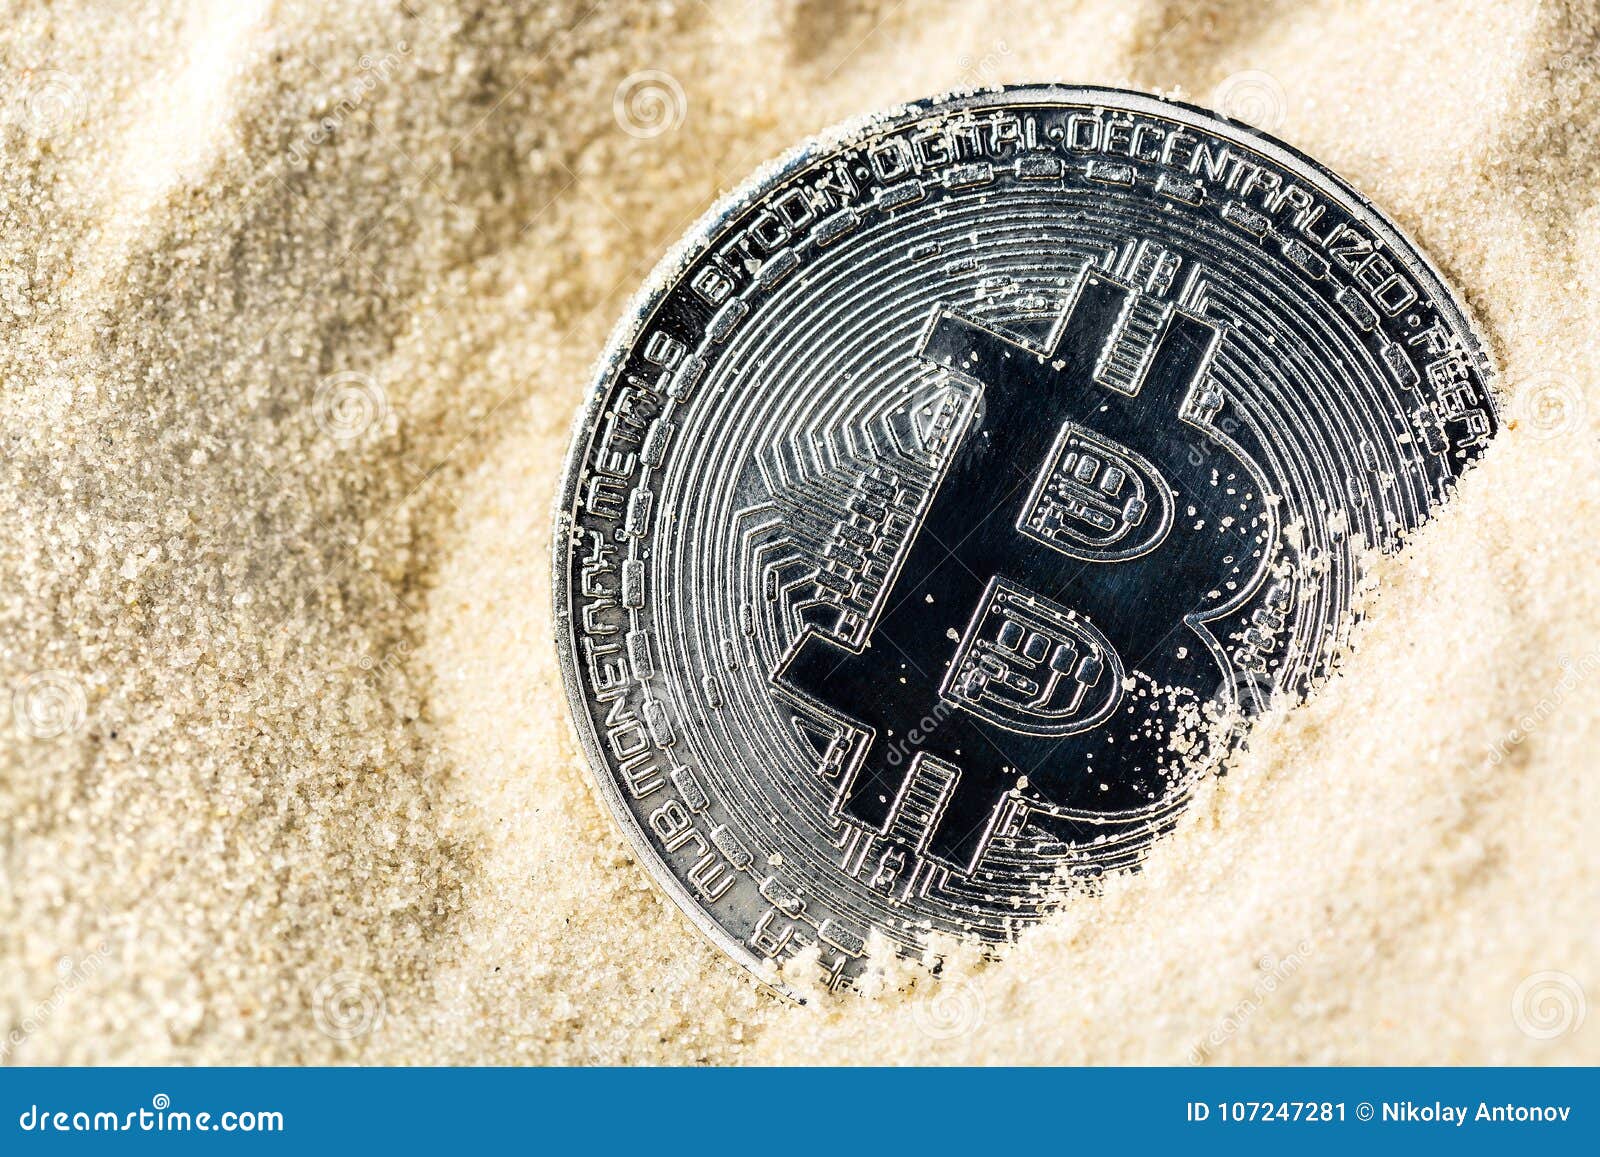 Bitcoin Coin Sinking In The Sand. Close Up Image. Crypto ...